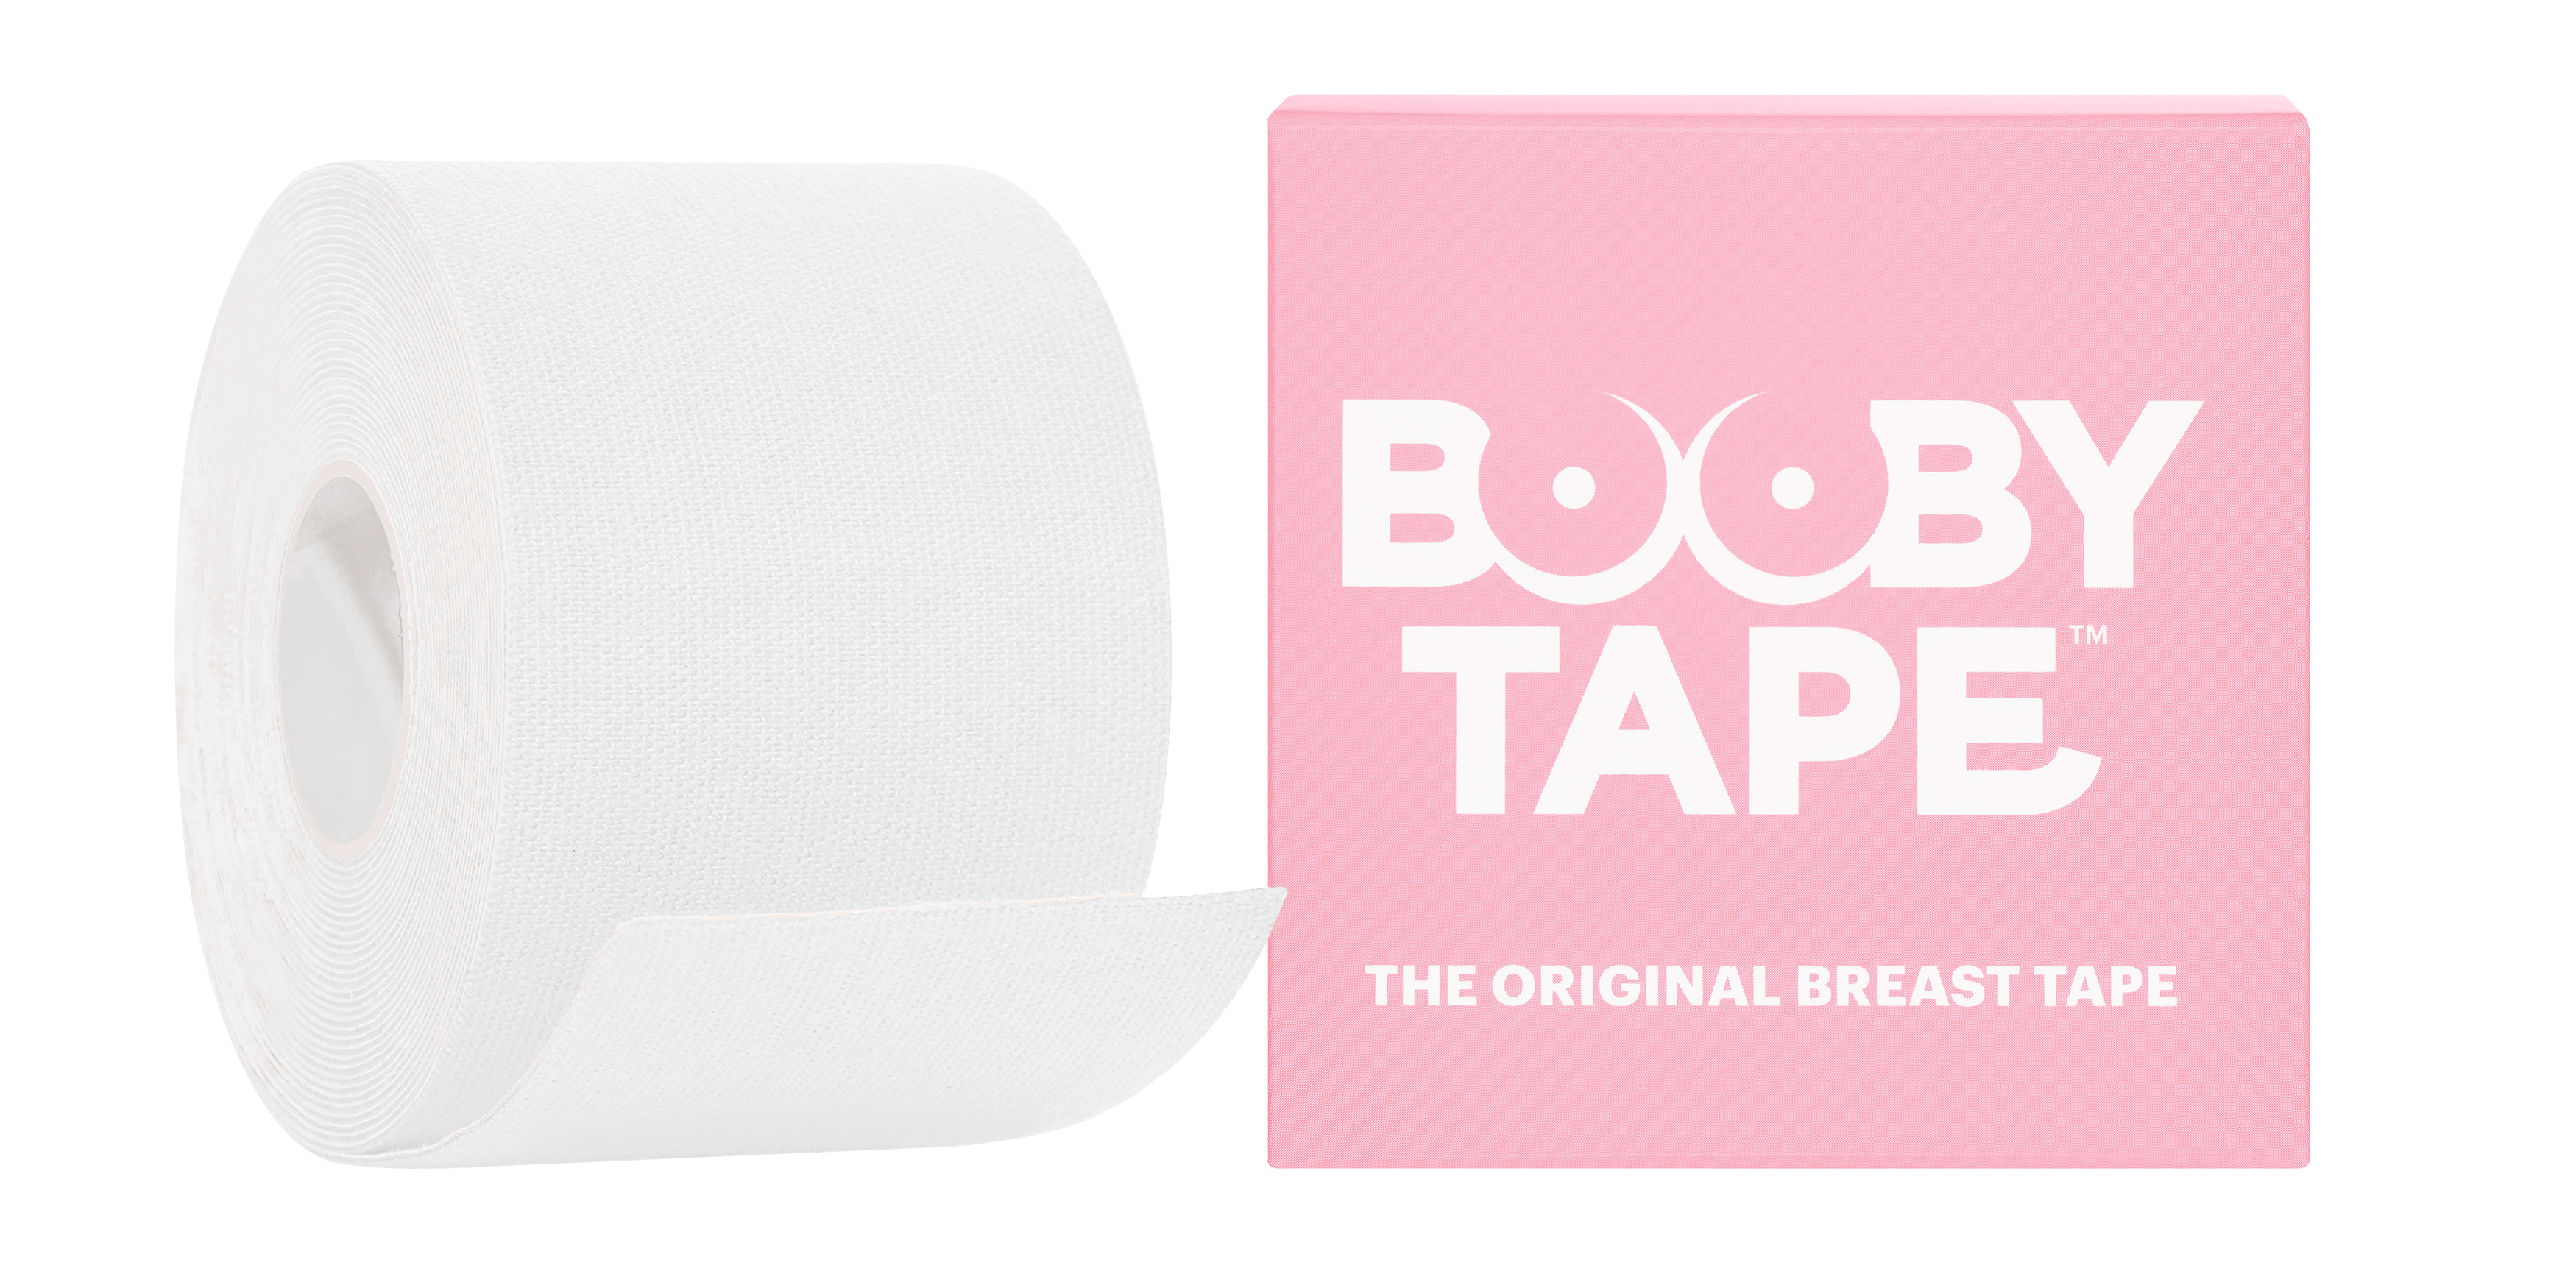 BOOBY TAPE WHITE